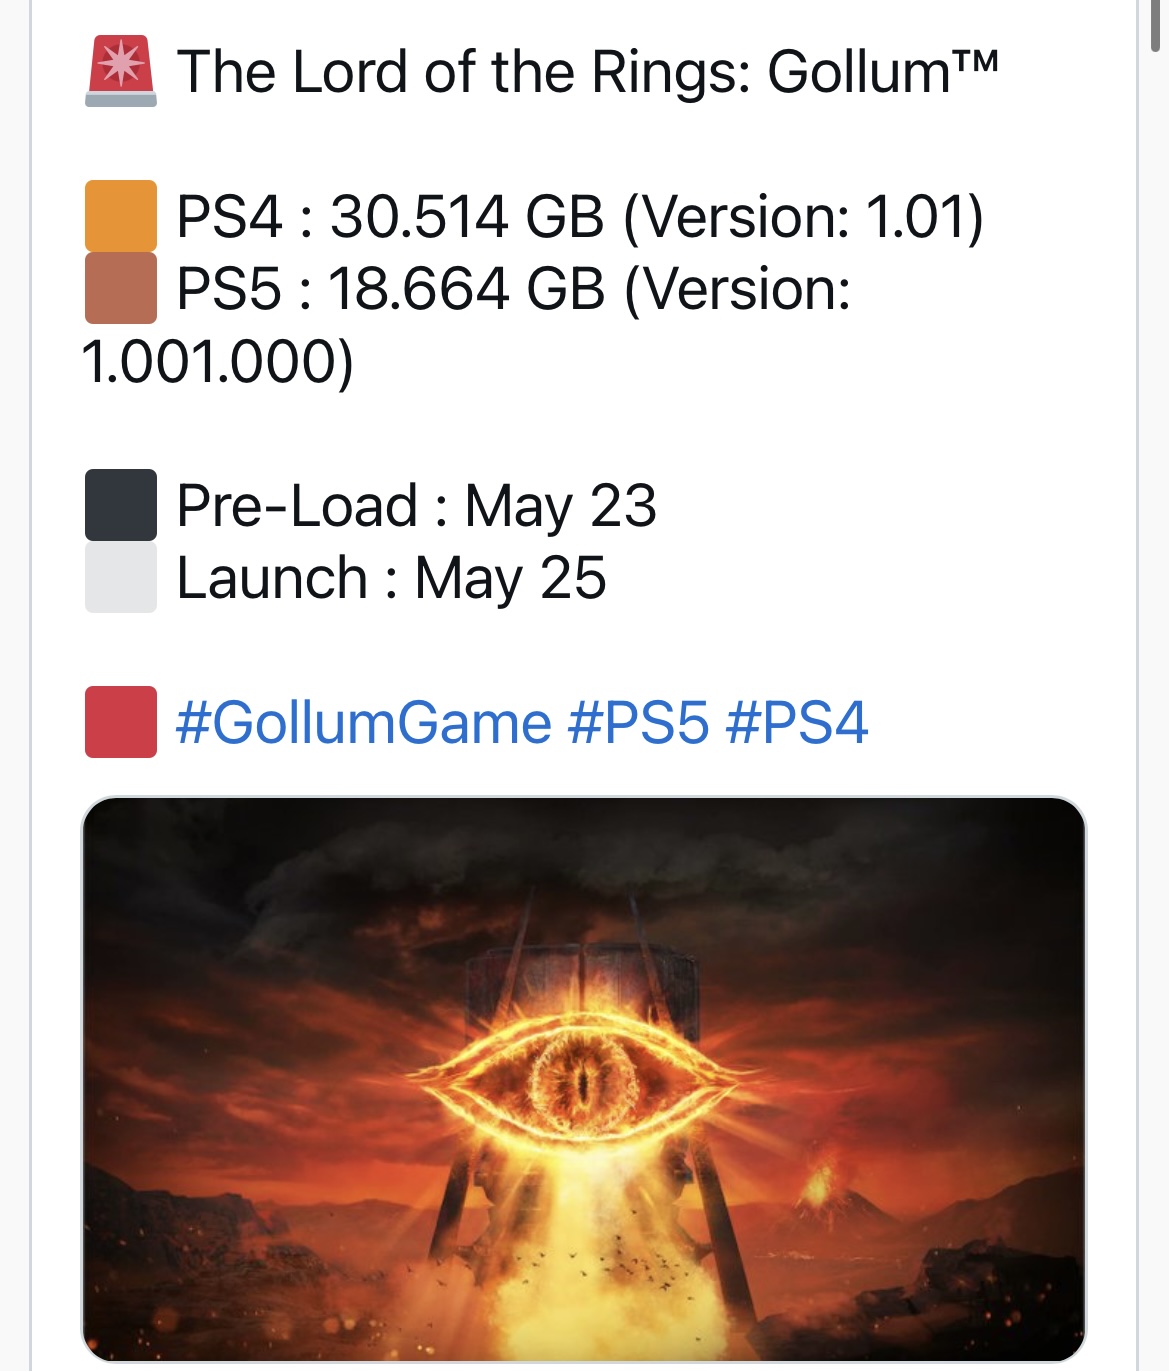 Lord of the Rings: Gollum Confirmed for PS5, Xbox Series X - IGN : r/PS4